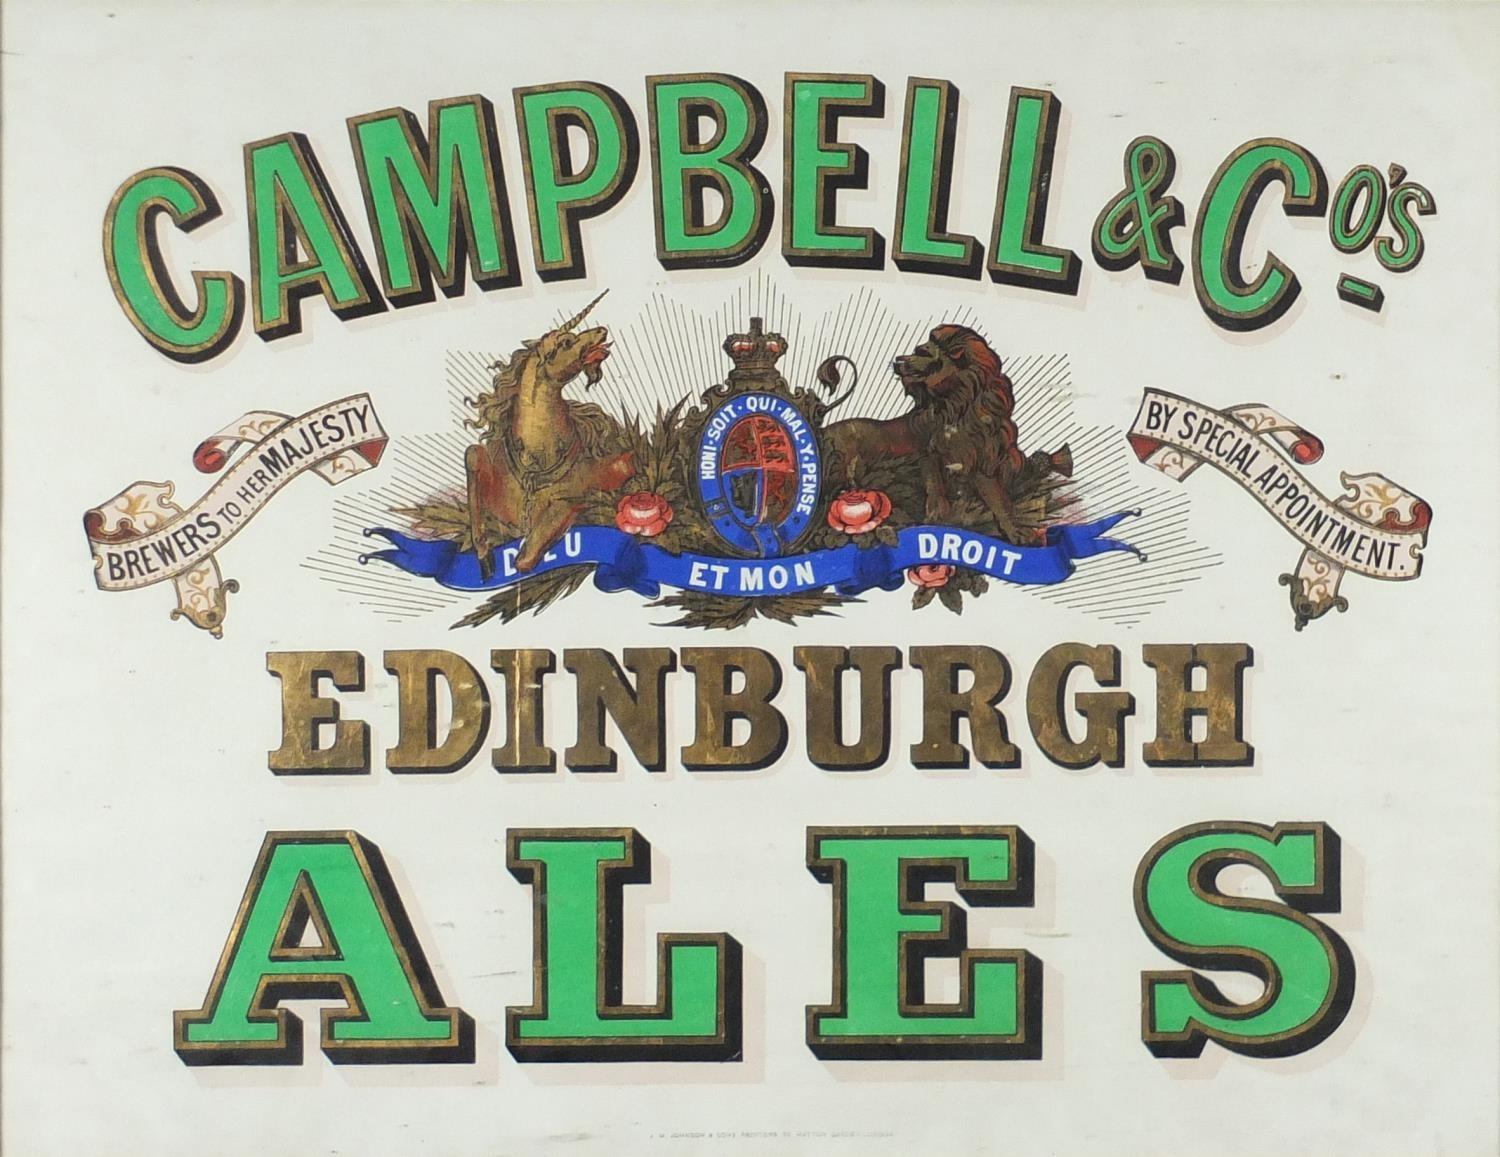 Vintage Campbell & Co Edinburgh Ales poster, printed by J N Johnson & Sons of Hatton Garden